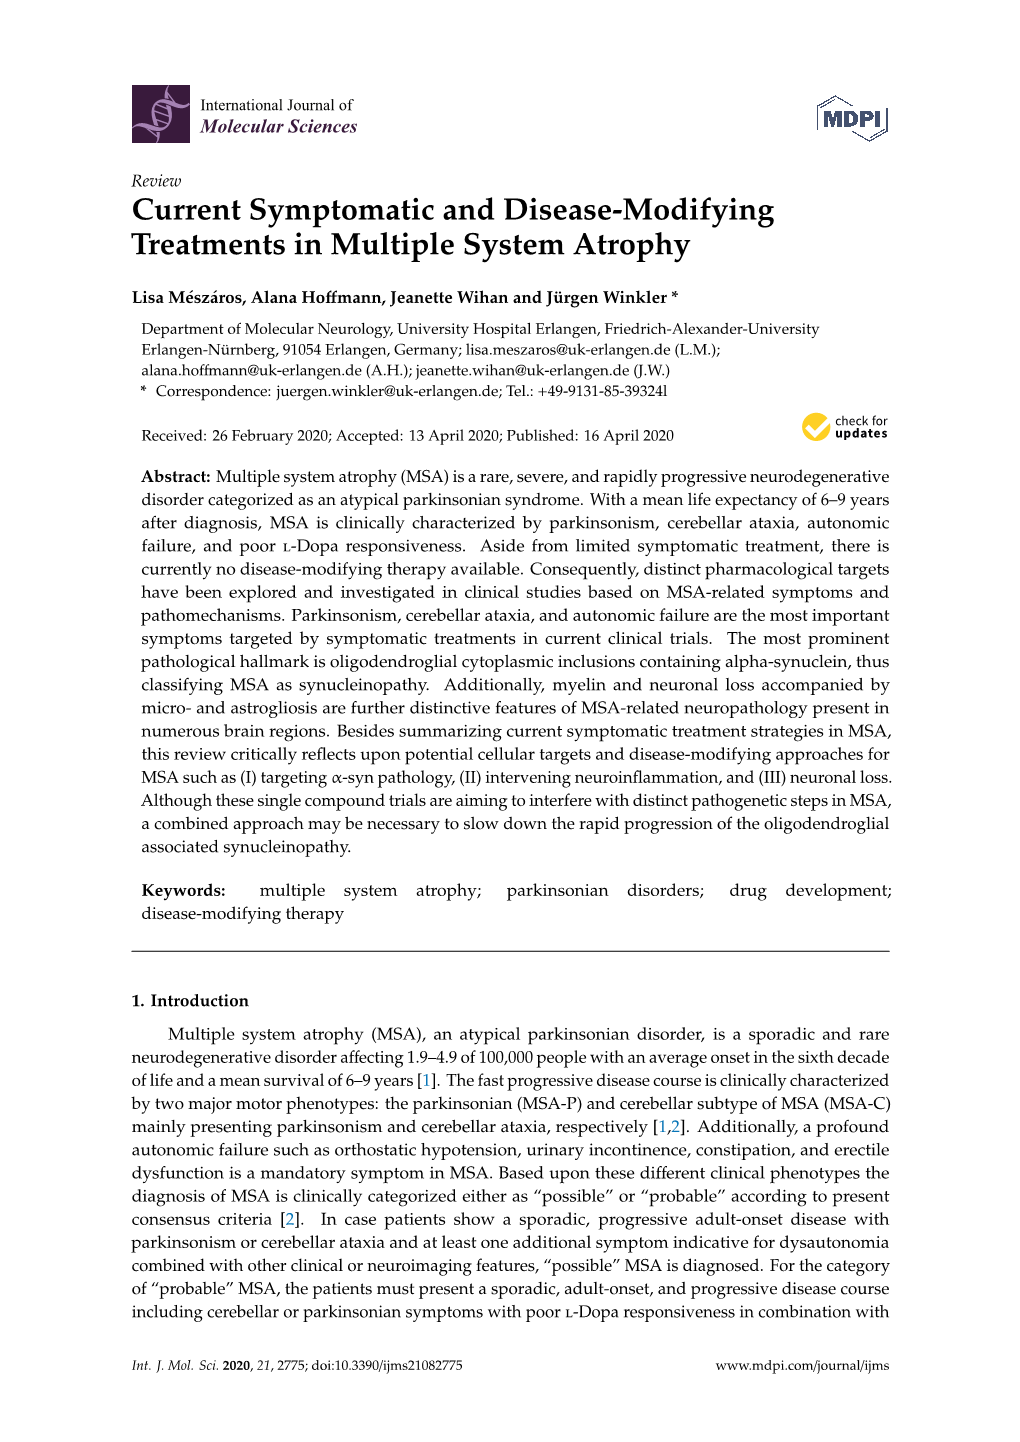 Current Symptomatic and Disease-Modifying Treatments in Multiple System Atrophy